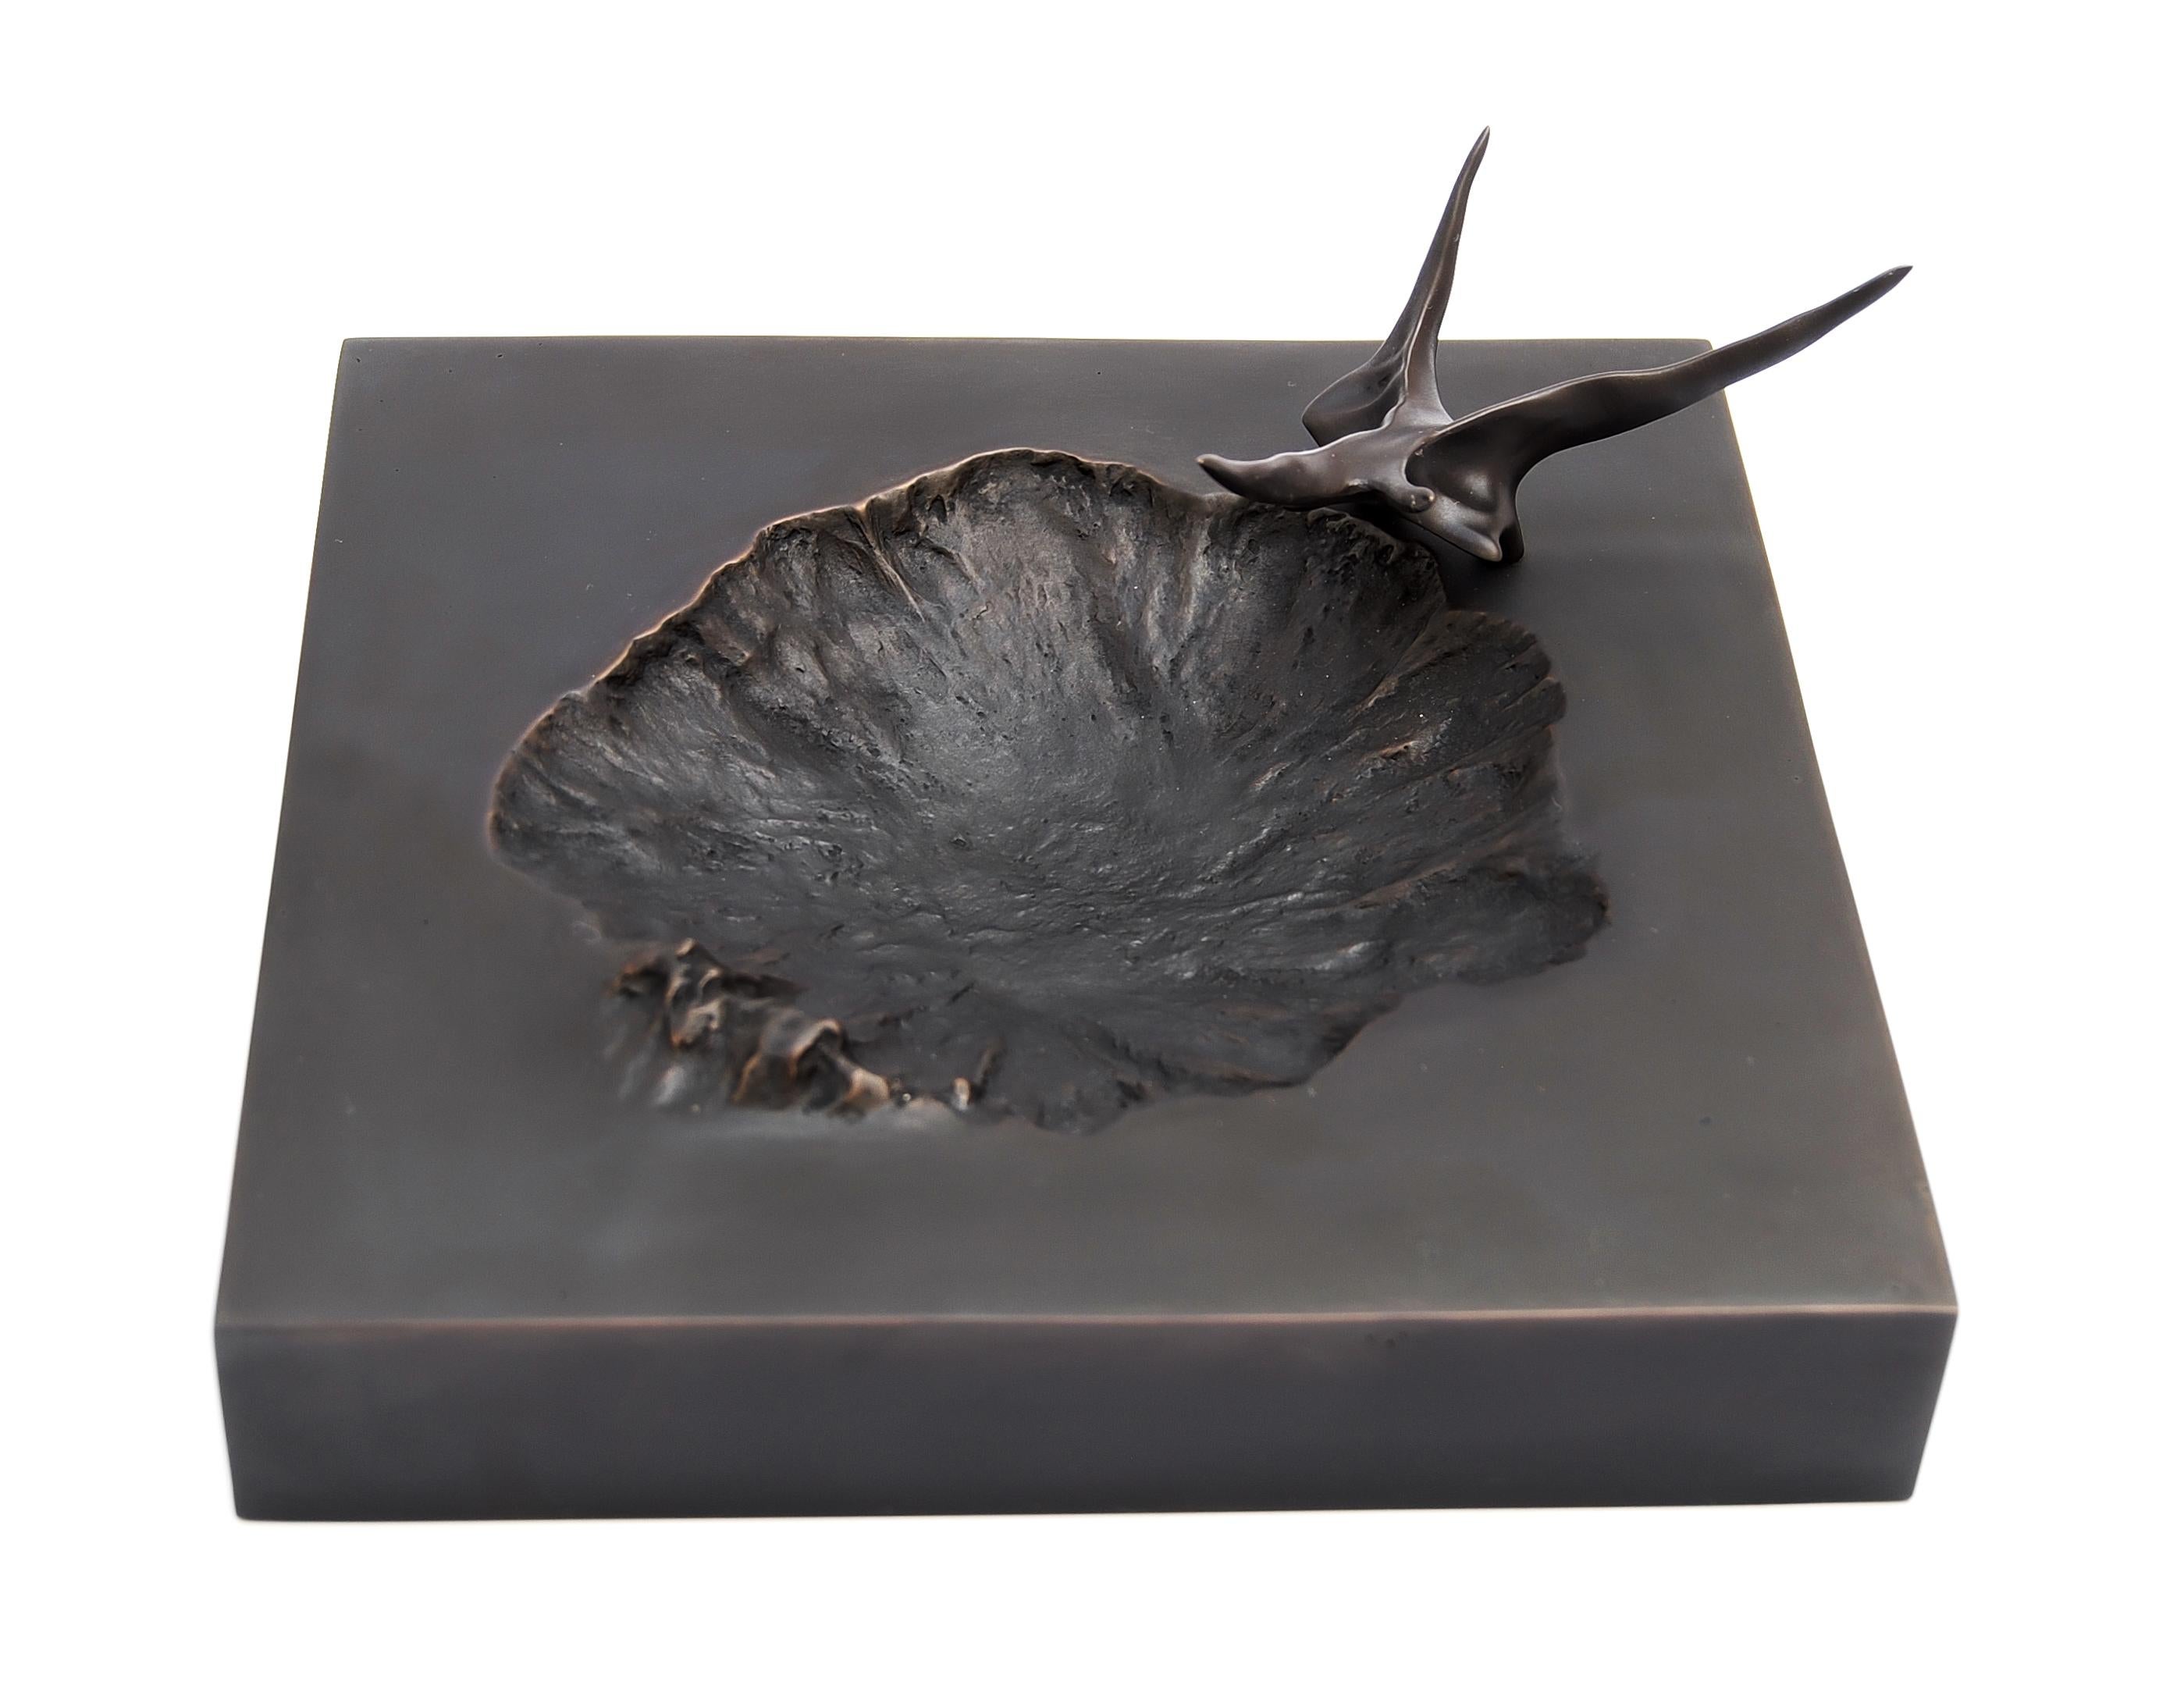 Morrison bowl by Fakasaka Design
Dimensions: W 19.5 cm D 19.5 cm H 3.5cm.
Materials: dark bronze.

MORRISON BOWL / ASHTRAY / CENTERPIECE / CANDLE HOLDER / CARD HOLDER

 FAKASAKA is a design company focused on production of high-end furniture,